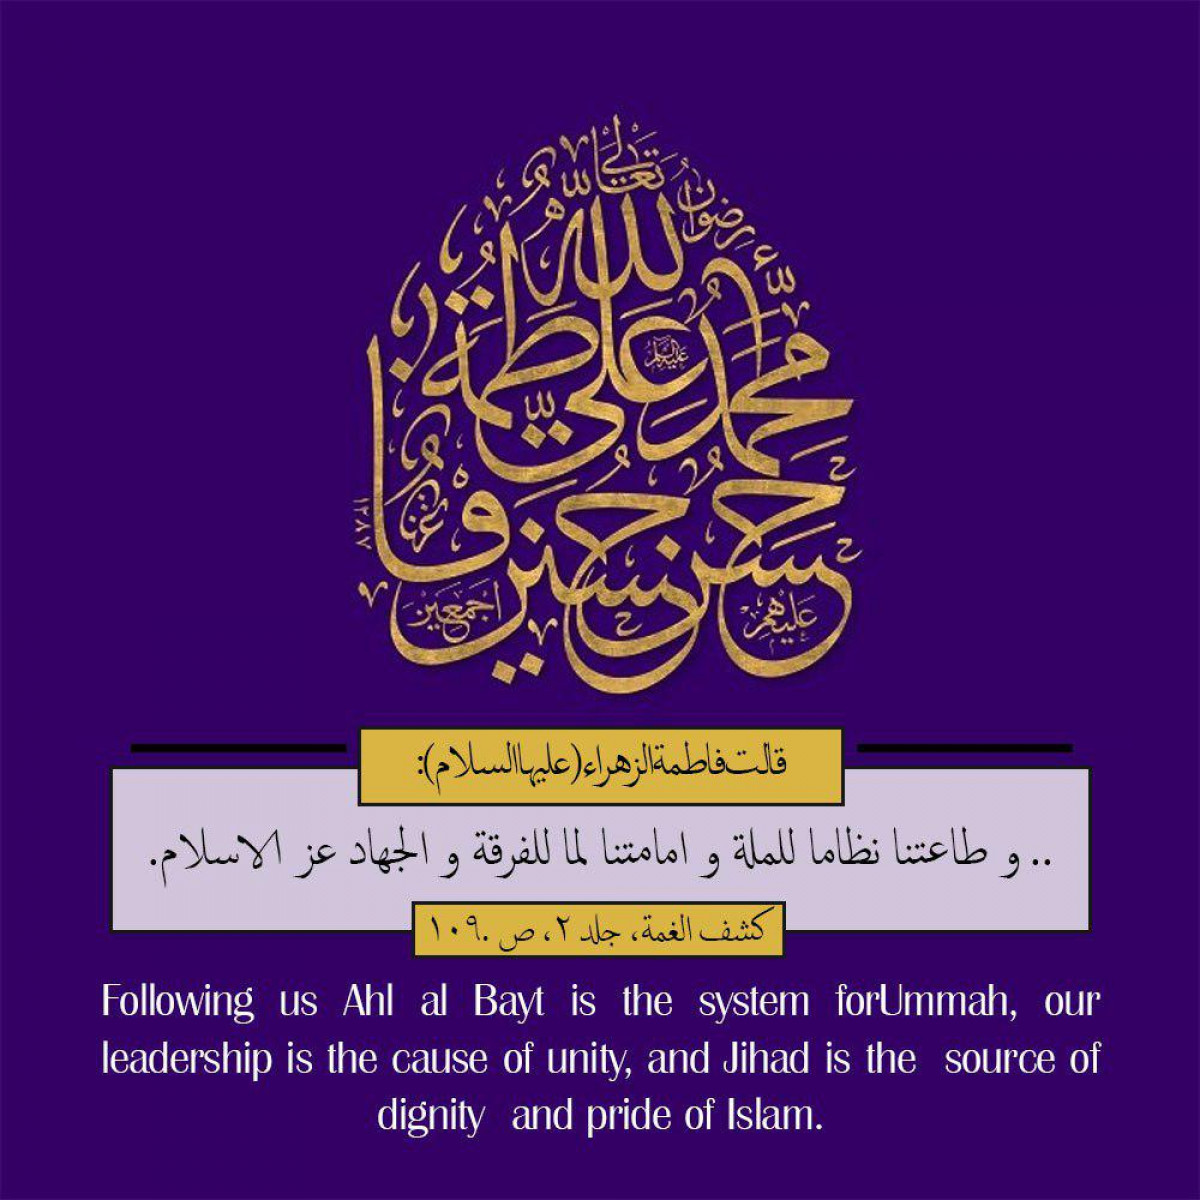 Following us Ahl al Bayt is the system for Ummah